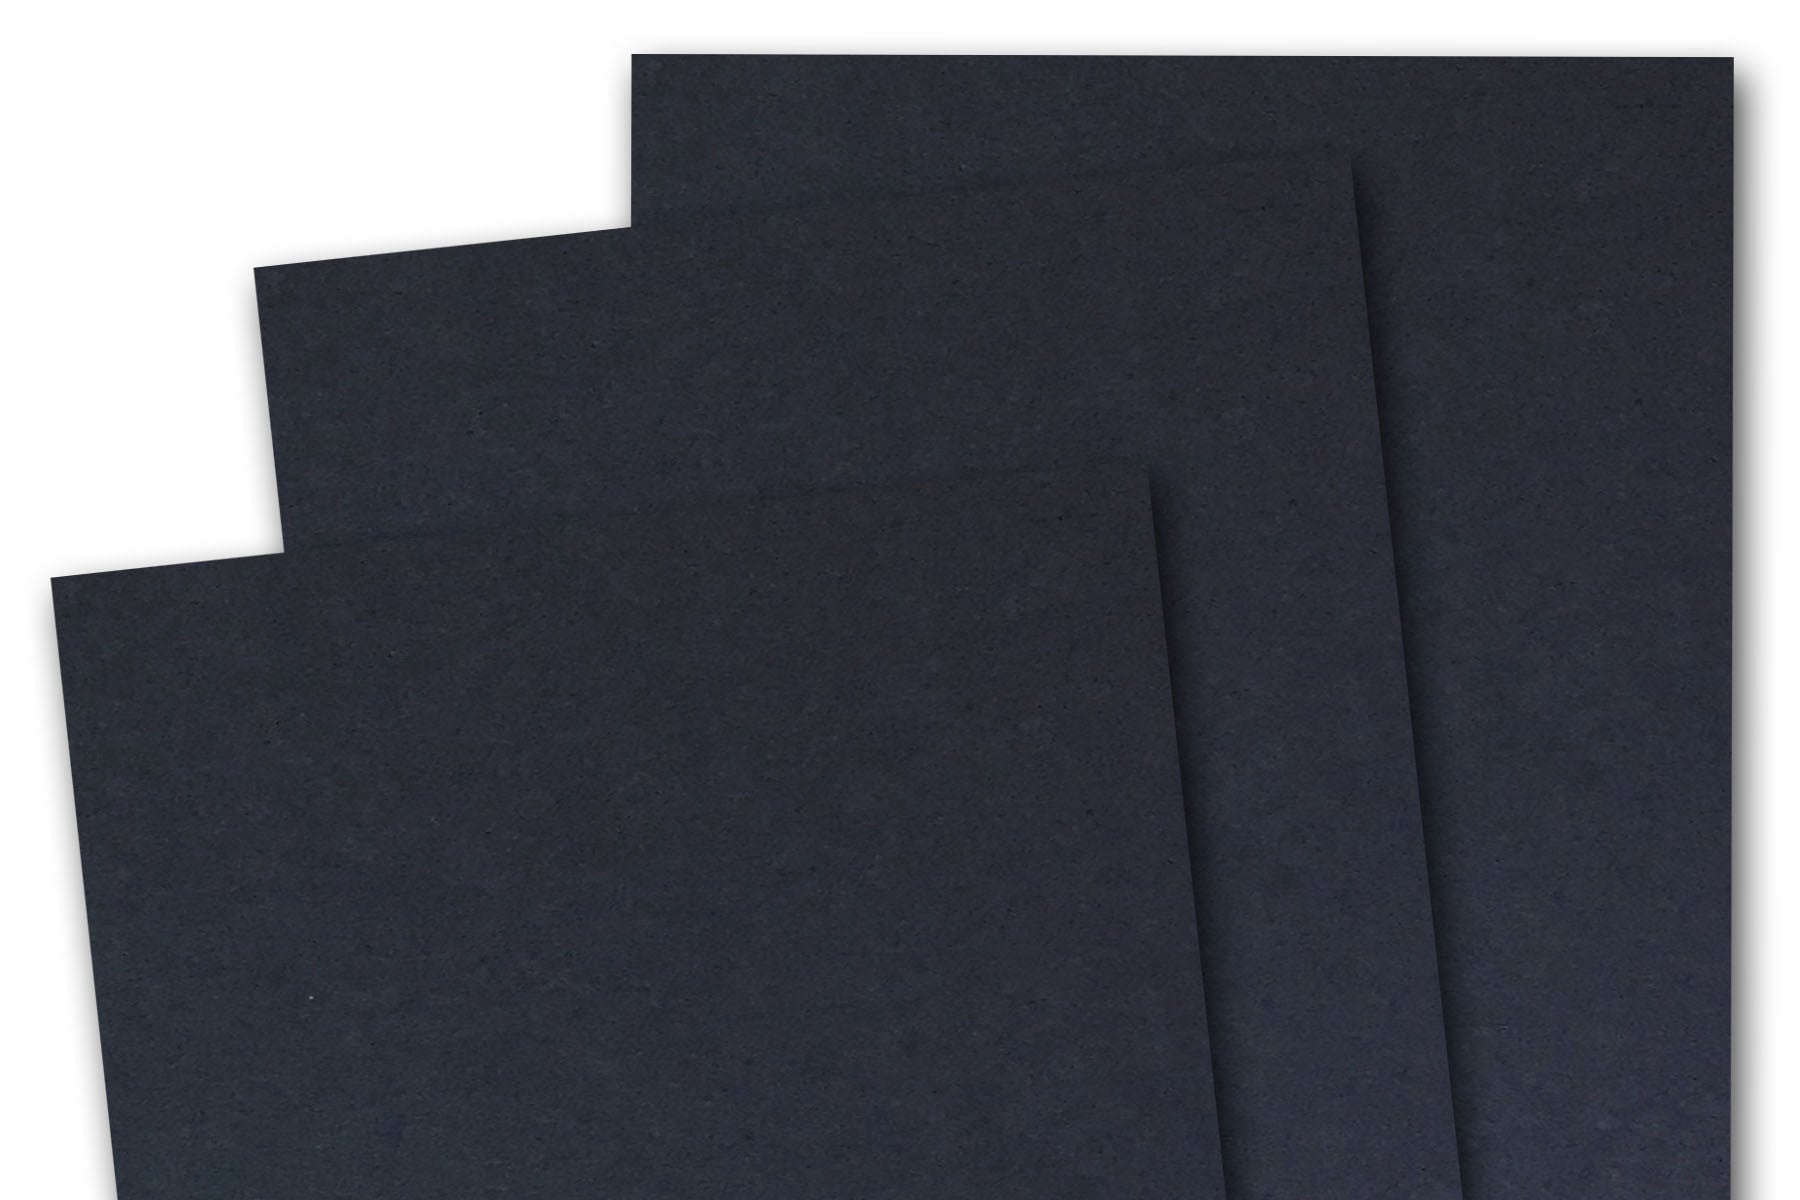 Discount Black Card Stock for formal DIY invitations and announcements -  CutCardStock